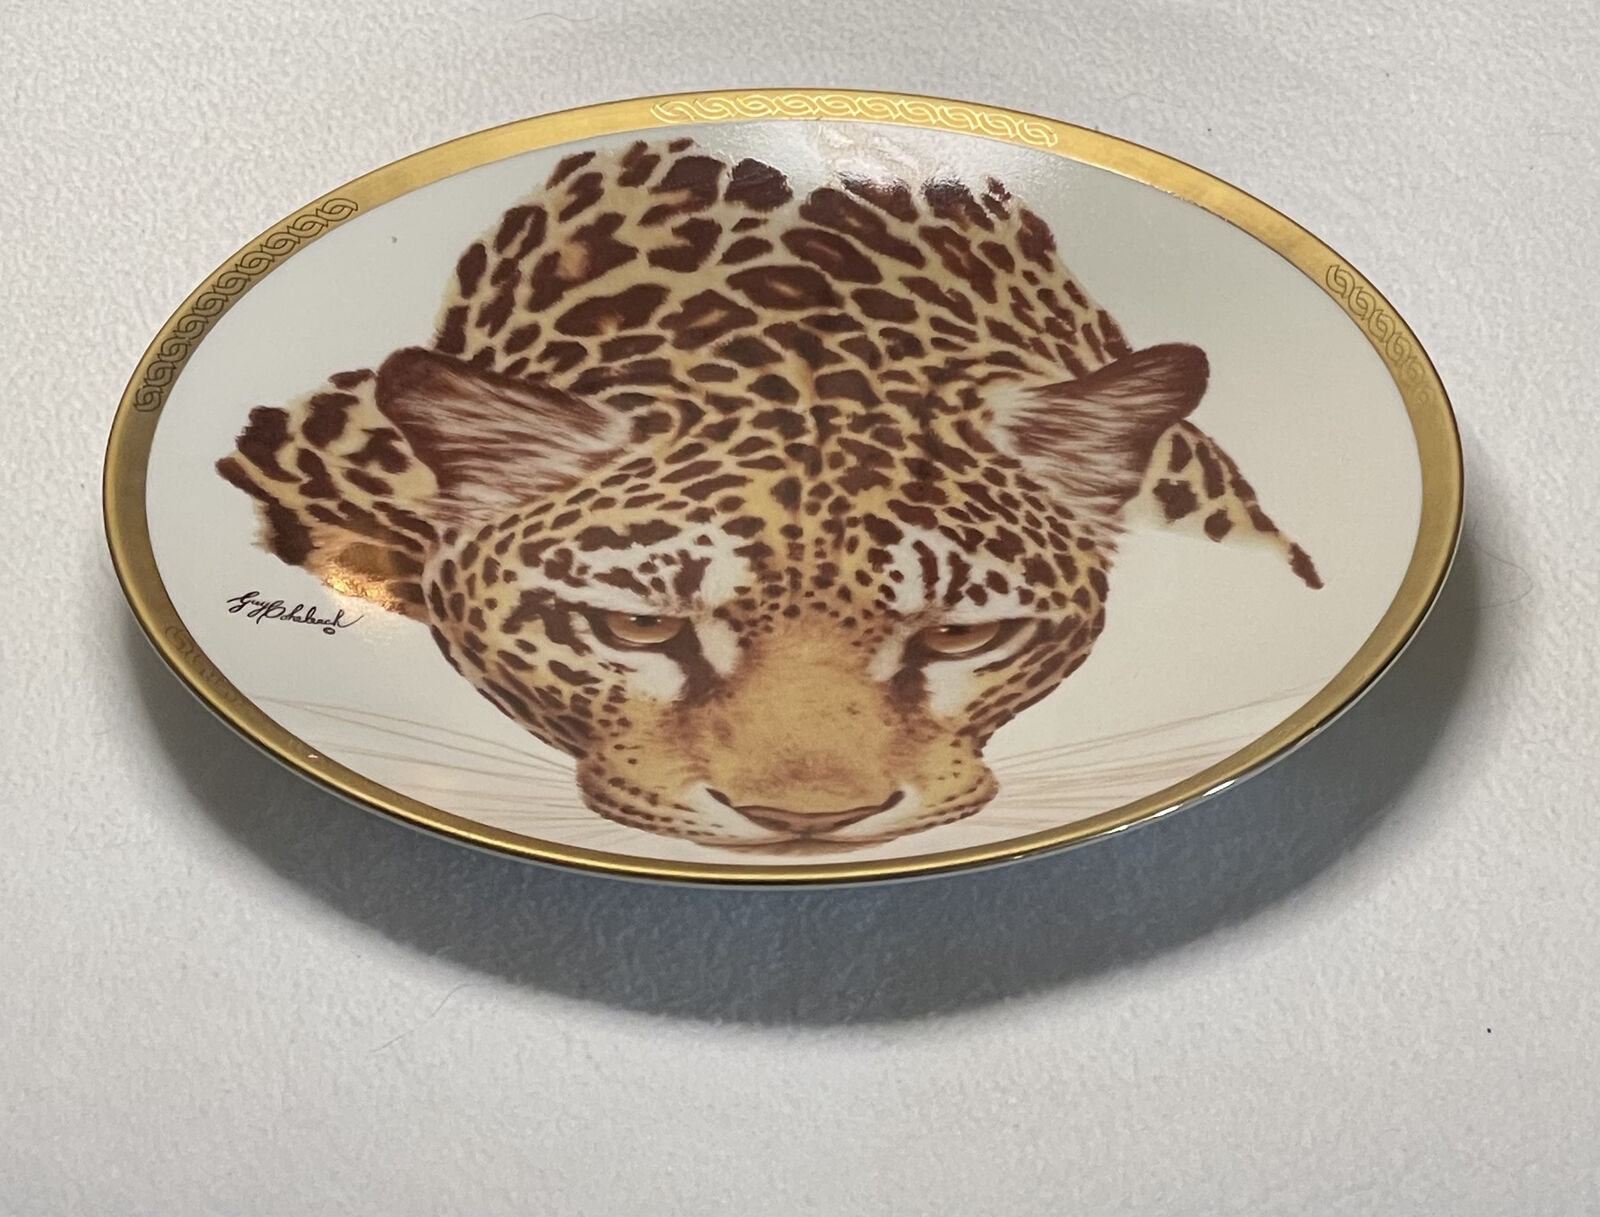 Lenox Great Cats Of The World Plate Collection Limited Edition 1994 - Jaguar